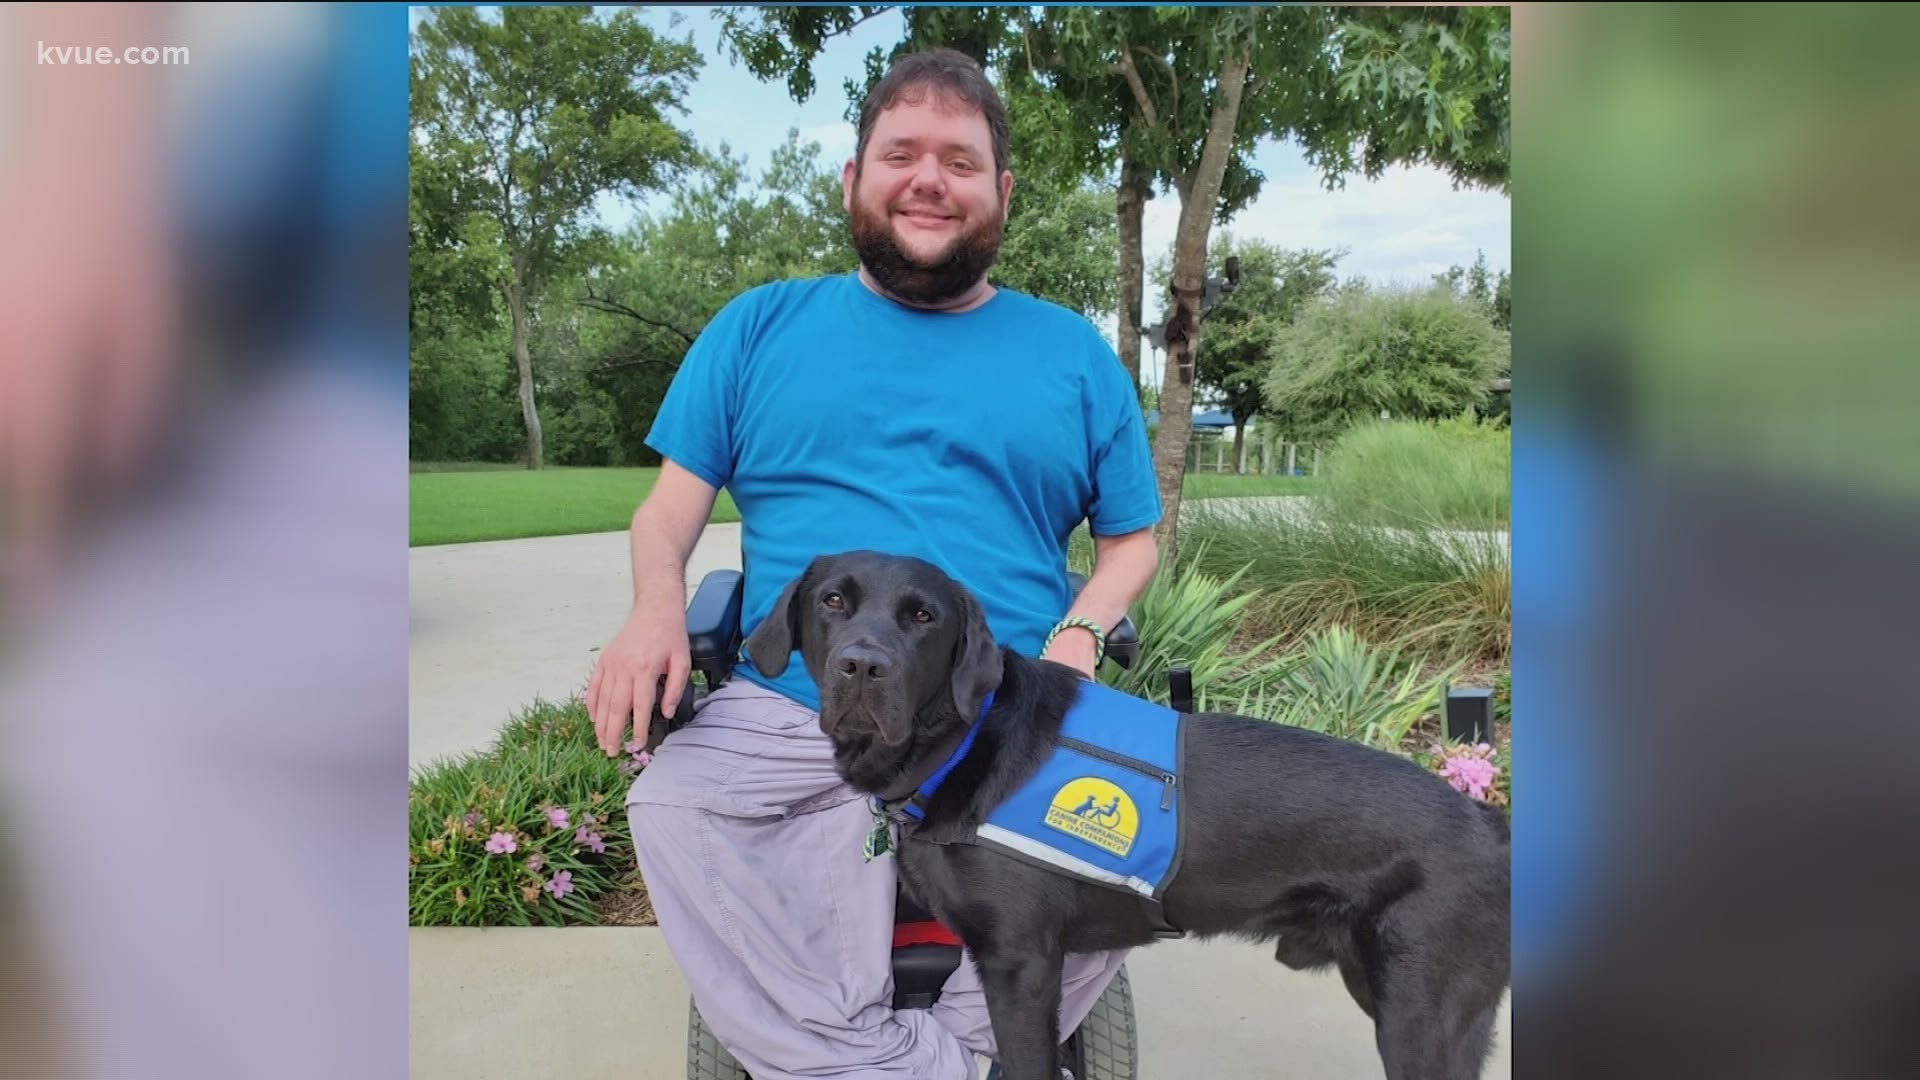 Canine Companion has given 89 service dogs to different people with disabilities since the start of the COVID-19 pandemic.